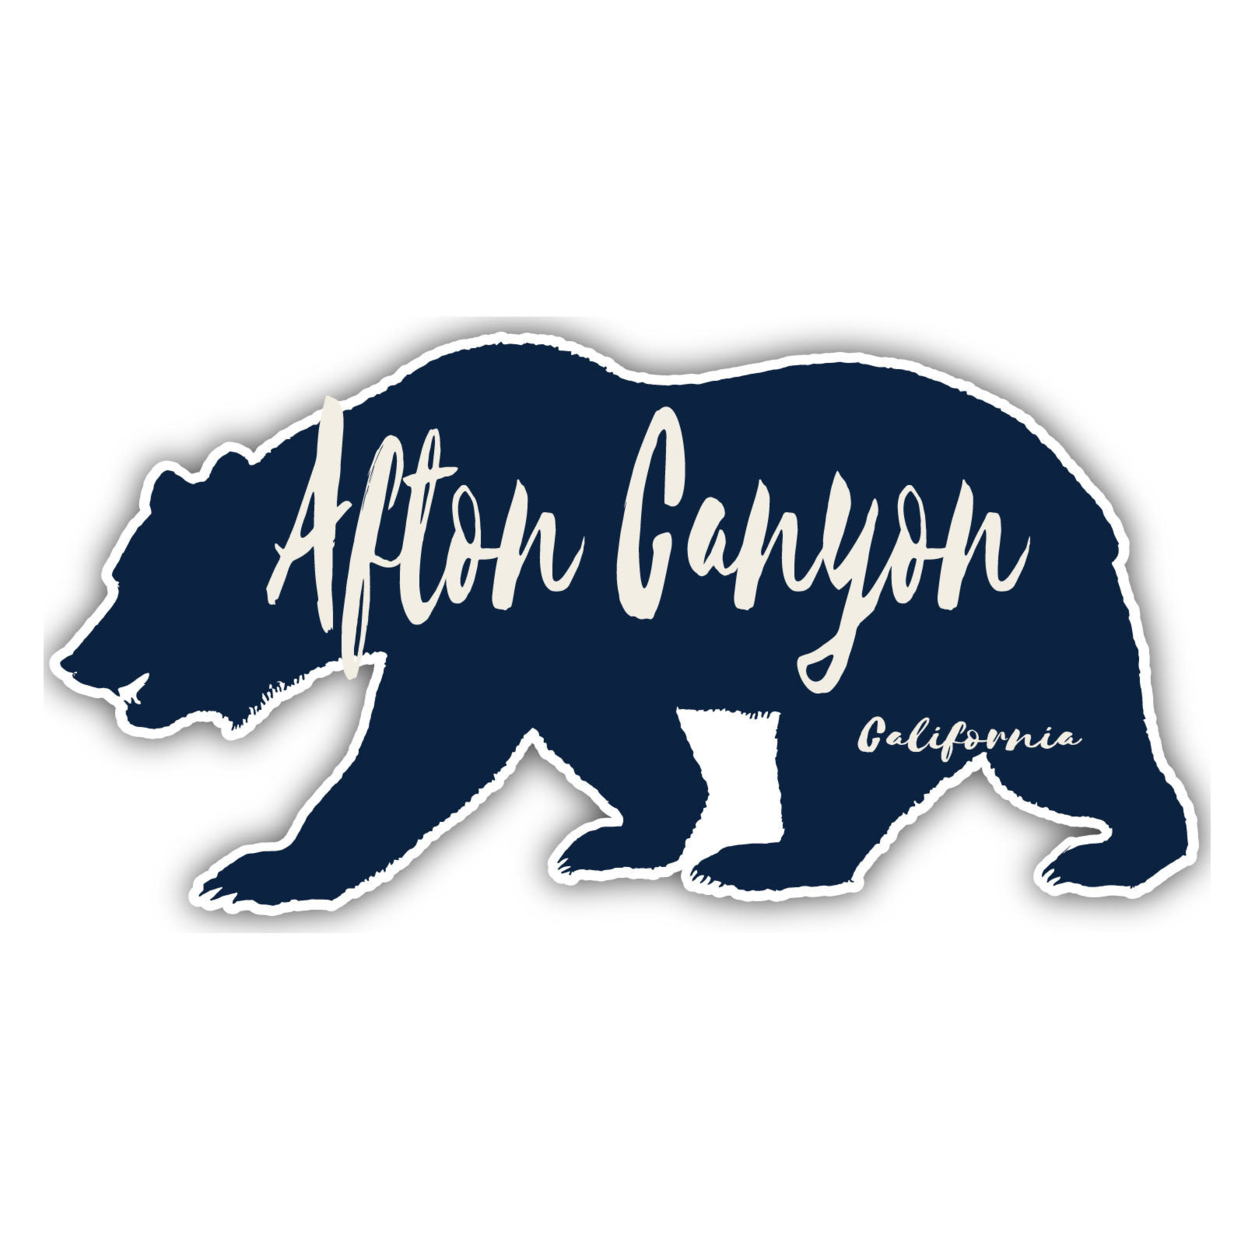 Afton Canyon California Souvenir Decorative Stickers (Choose Theme And Size) - 4-Pack, 10-Inch, Bear